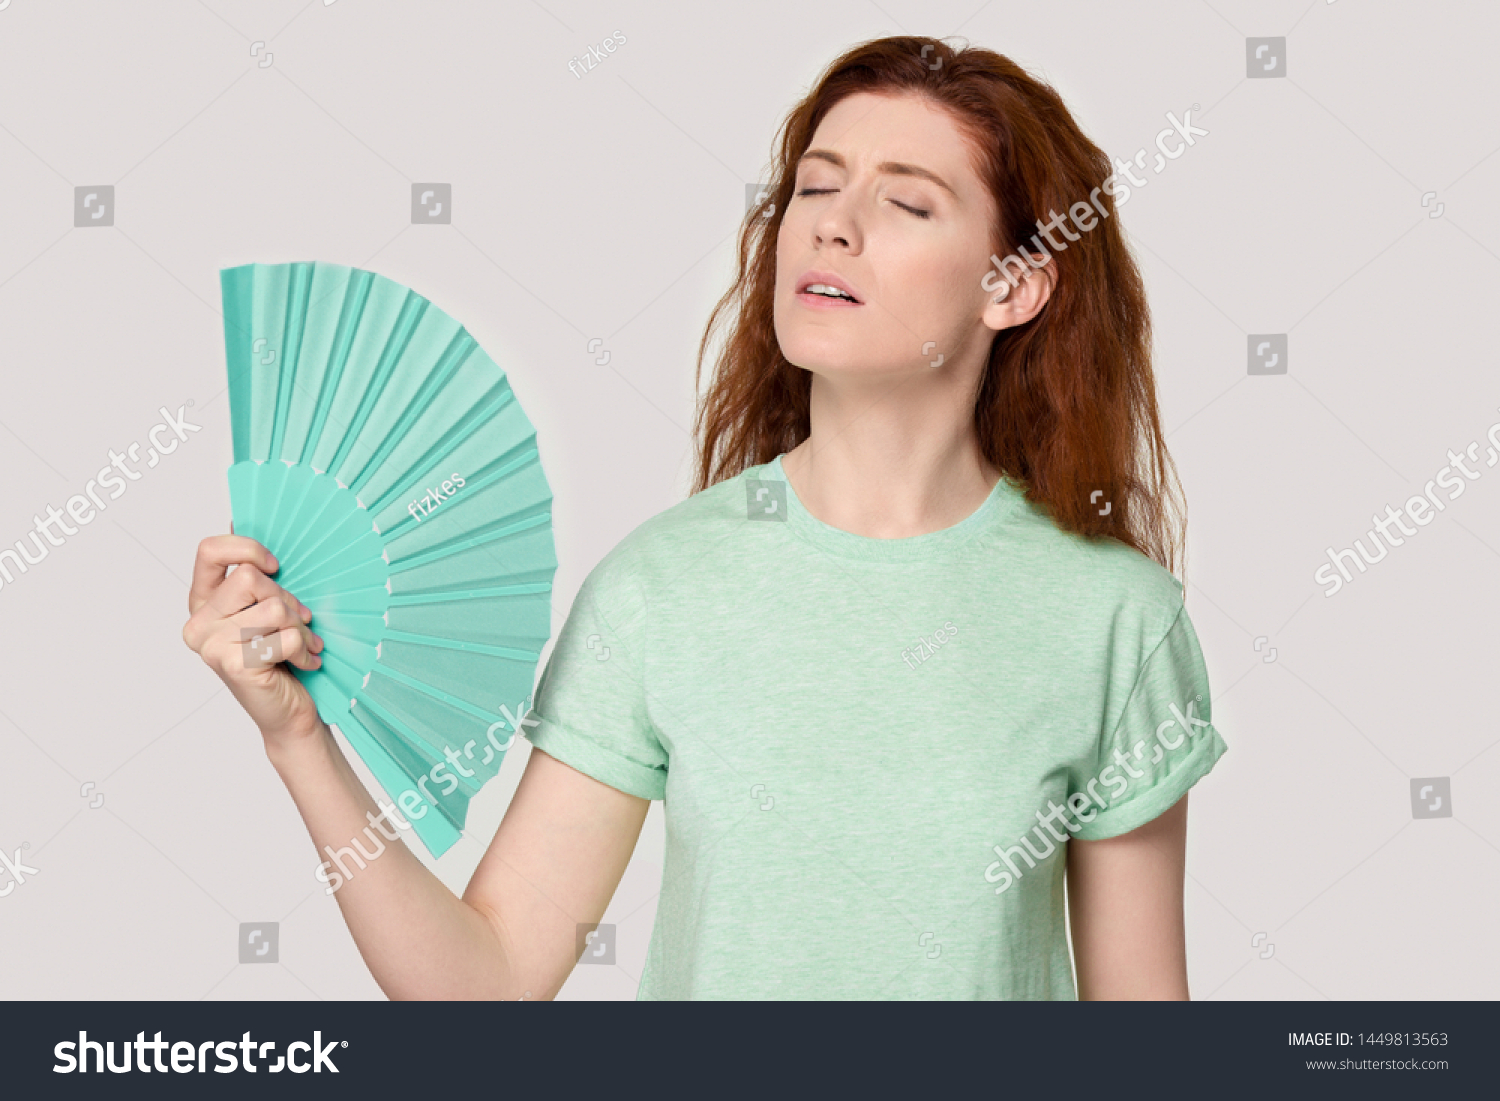 Overheated young red-haired woman using fan, cooling herself, suffering from hot summer weather or high temperature inside, heat stroke, feeling unwell, sweating, isolated on grey studio background. #1449813563